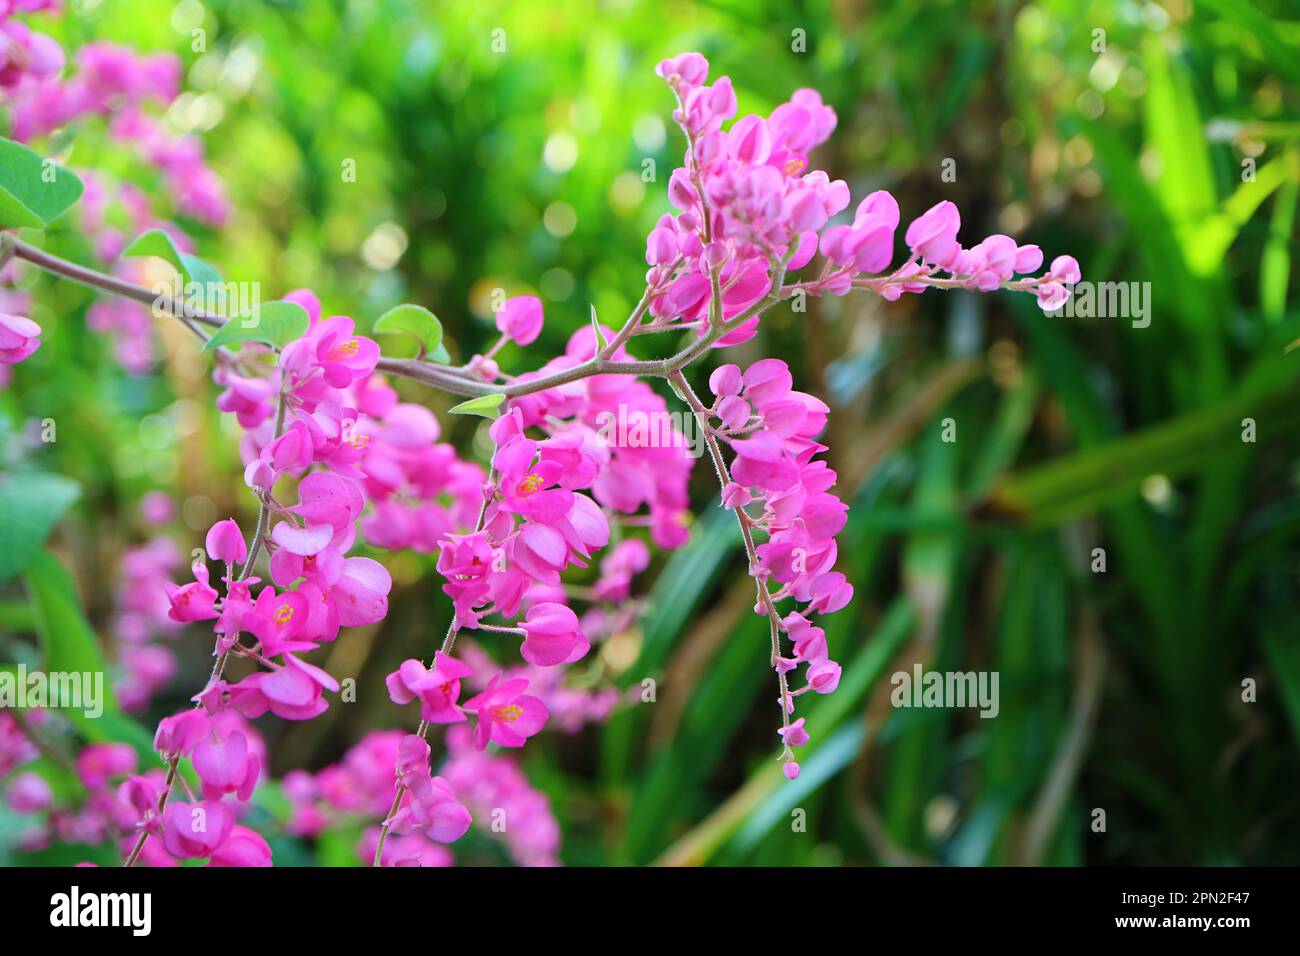 Closeup Bunches of Gorgeous Coral Vine or Mexican Creeper Flowers Blooming in the Sunlight Stock Photo